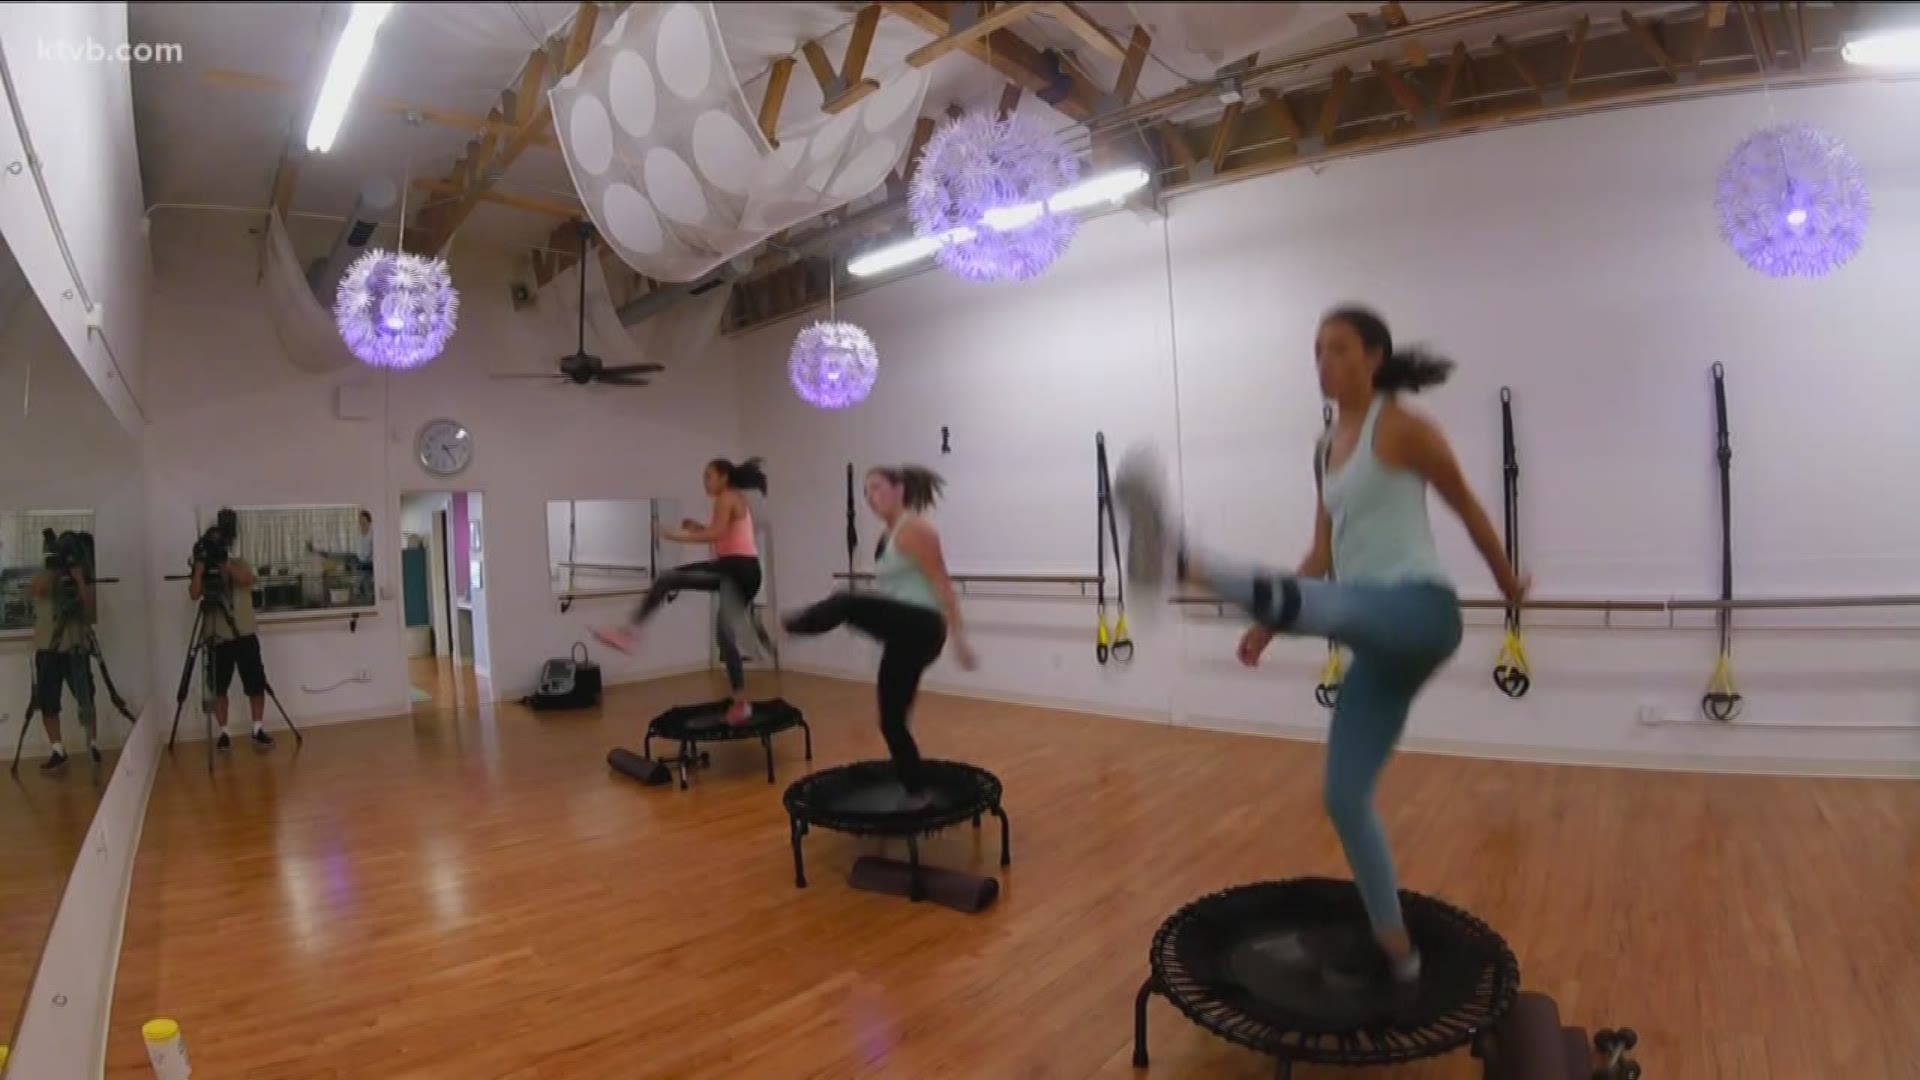 When it comes to workouts and exercise classes, this new gym in Boise bucks the old routine.